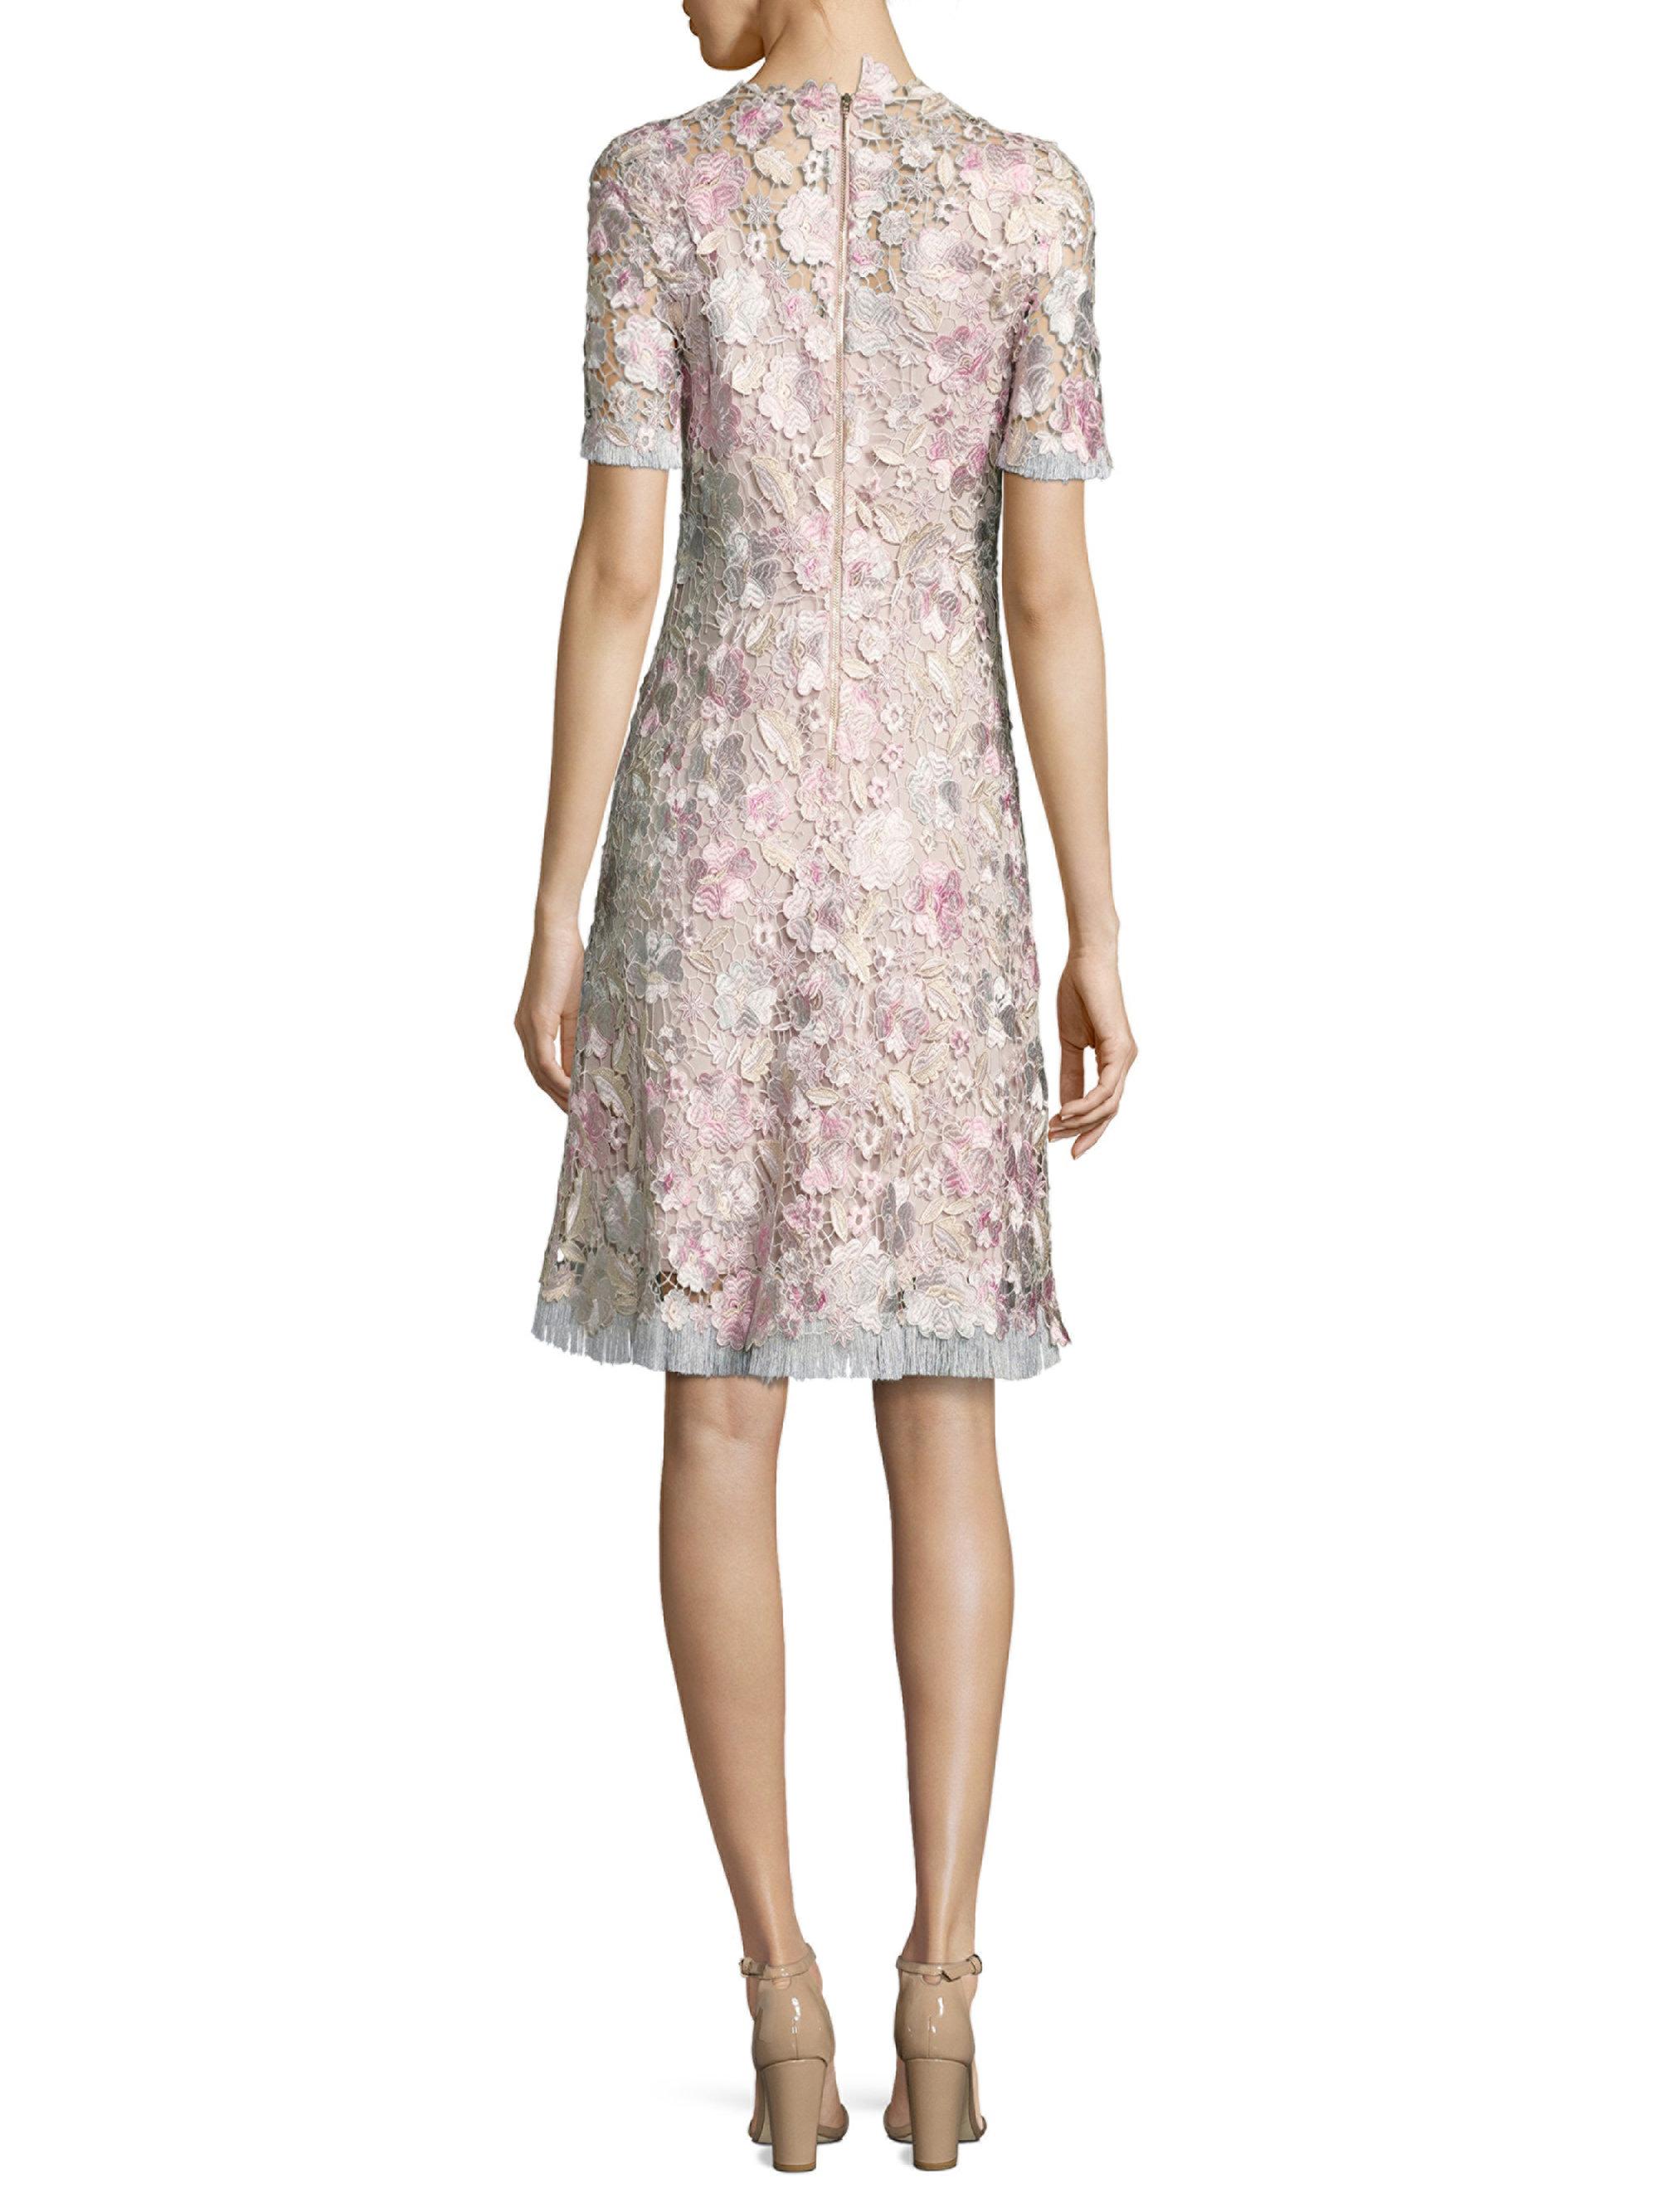 Elie Tahari Laura Floral Lace A-line Dress in Pink - Lyst